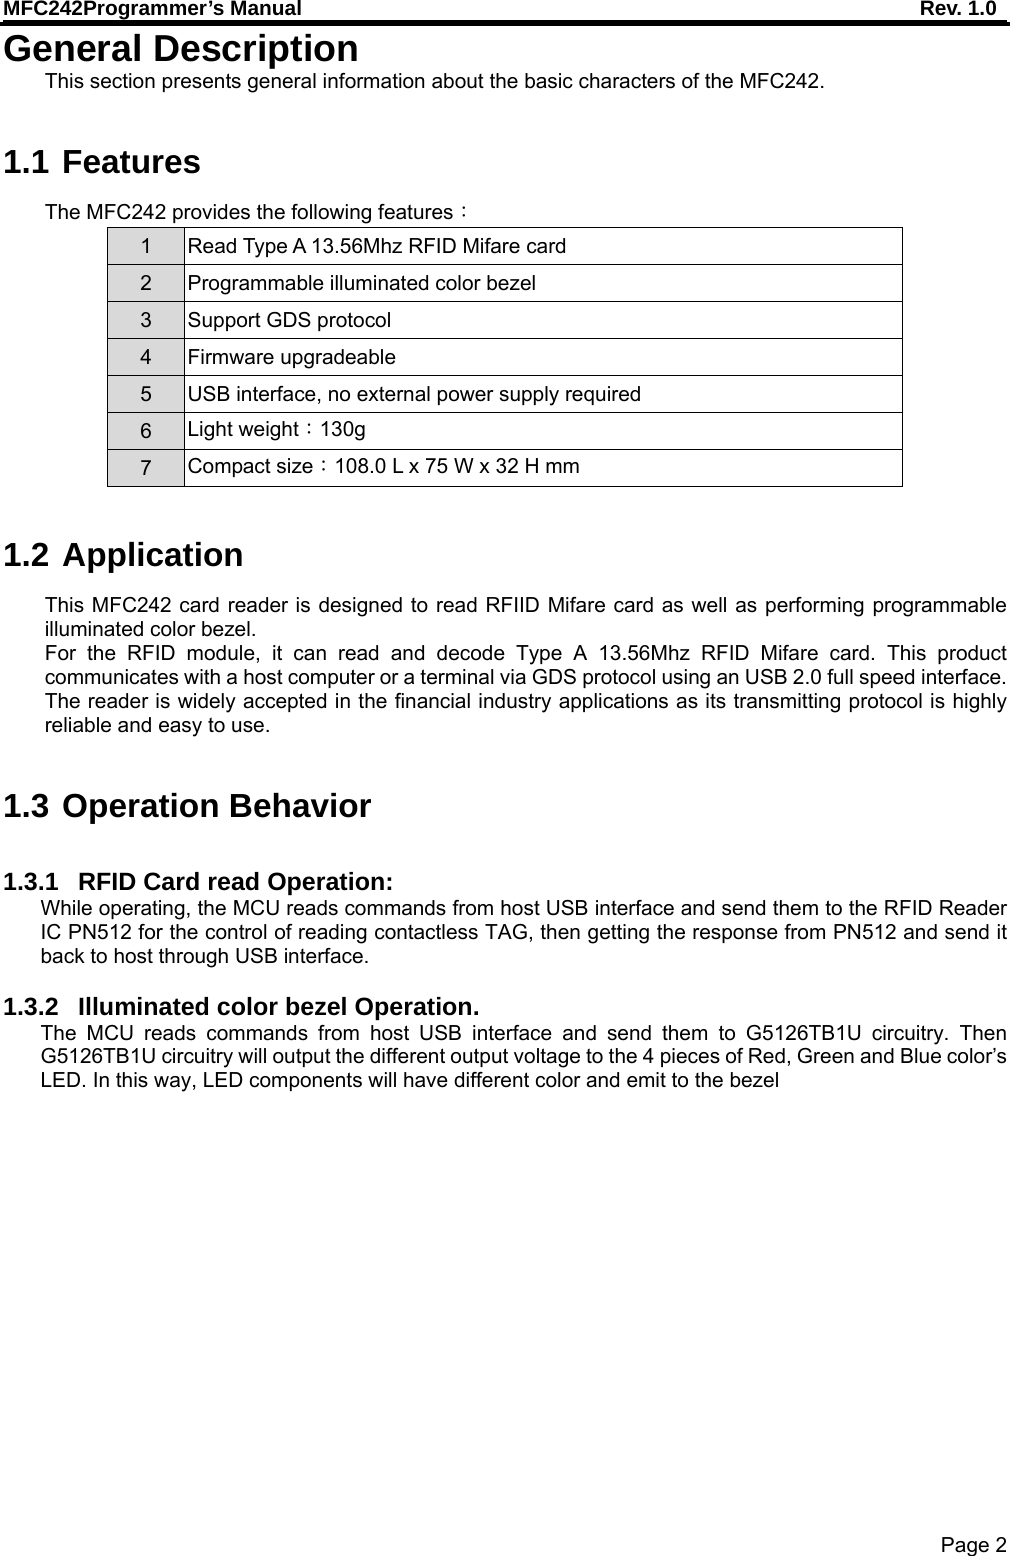 MFC242Programmer’s Manual    Rev. 1.0 Page 2 General Description This section presents general information about the basic characters of the MFC242.  1.1 Features The MFC242 provides the following features： 1  Read Type A 13.56Mhz RFID Mifare card 2 Programmable illuminated color bezel 3  Support GDS protocol 4 Firmware upgradeable 5  USB interface, no external power supply required 6  Light weight：130g 7  Compact size：108.0 L x 75 W x 32 H mm  1.2 Application This MFC242 card reader is designed to read RFIID Mifare card as well as performing programmable illuminated color bezel. For the RFID module, it can read and decode Type A 13.56Mhz RFID Mifare card. This product communicates with a host computer or a terminal via GDS protocol using an USB 2.0 full speed interface. The reader is widely accepted in the financial industry applications as its transmitting protocol is highly reliable and easy to use.  1.3 Operation Behavior  1.3.1  RFID Card read Operation: While operating, the MCU reads commands from host USB interface and send them to the RFID Reader IC PN512 for the control of reading contactless TAG, then getting the response from PN512 and send it back to host through USB interface.  1.3.2  Illuminated color bezel Operation. The MCU reads commands from host USB interface and send them to G5126TB1U circuitry. Then G5126TB1U circuitry will output the different output voltage to the 4 pieces of Red, Green and Blue color’s LED. In this way, LED components will have different color and emit to the bezel  